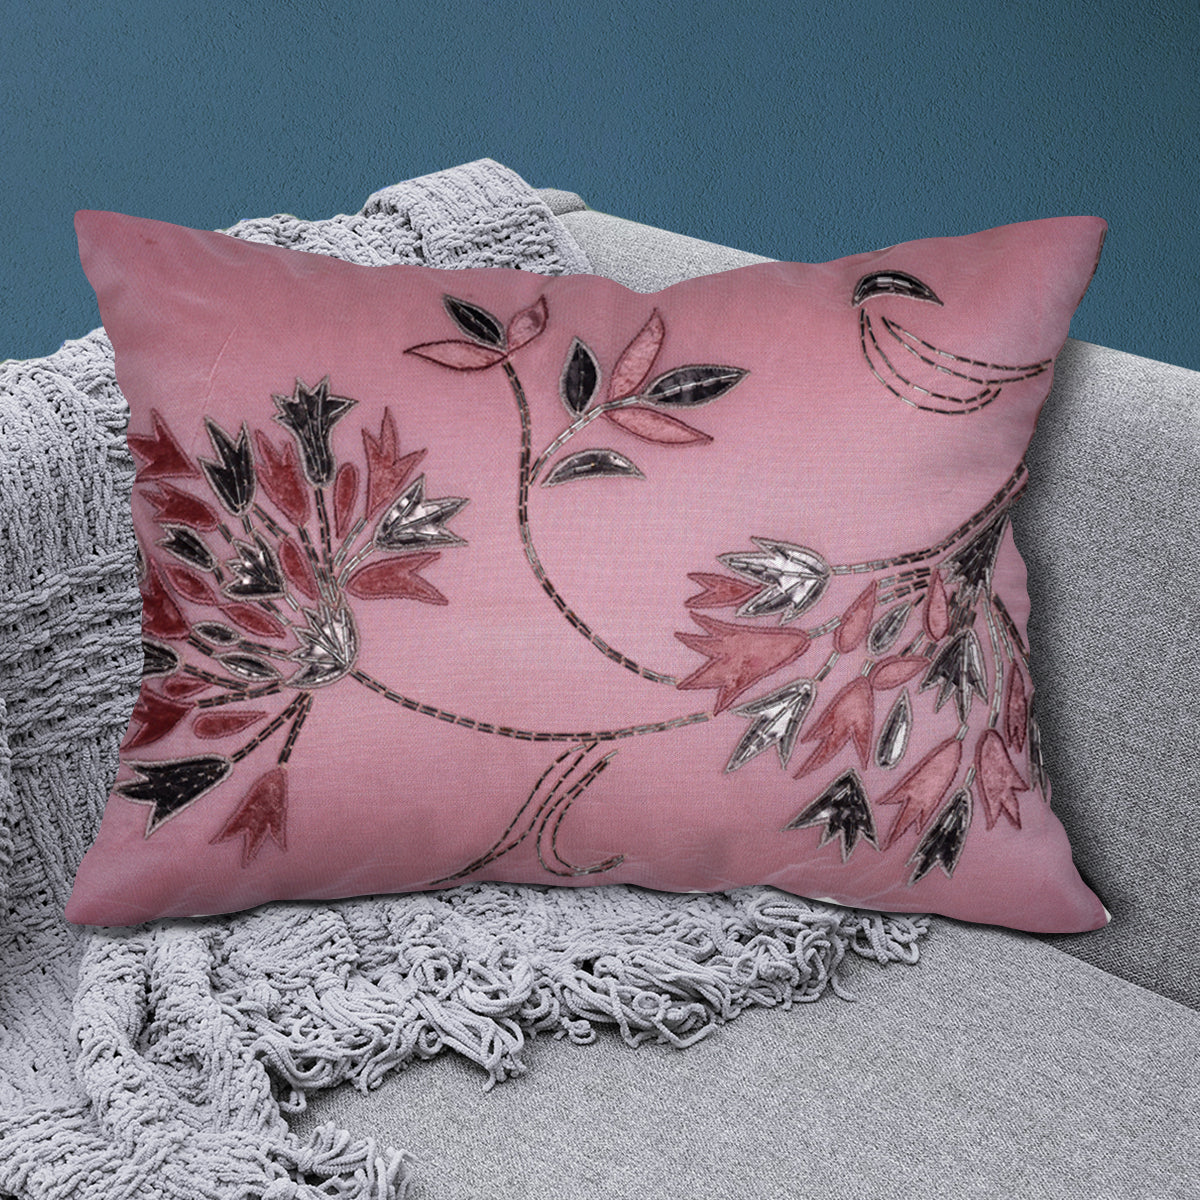 Pink Throw Pillow Covers - Set of 2 and 4, 14 x 20 inches - Decozen